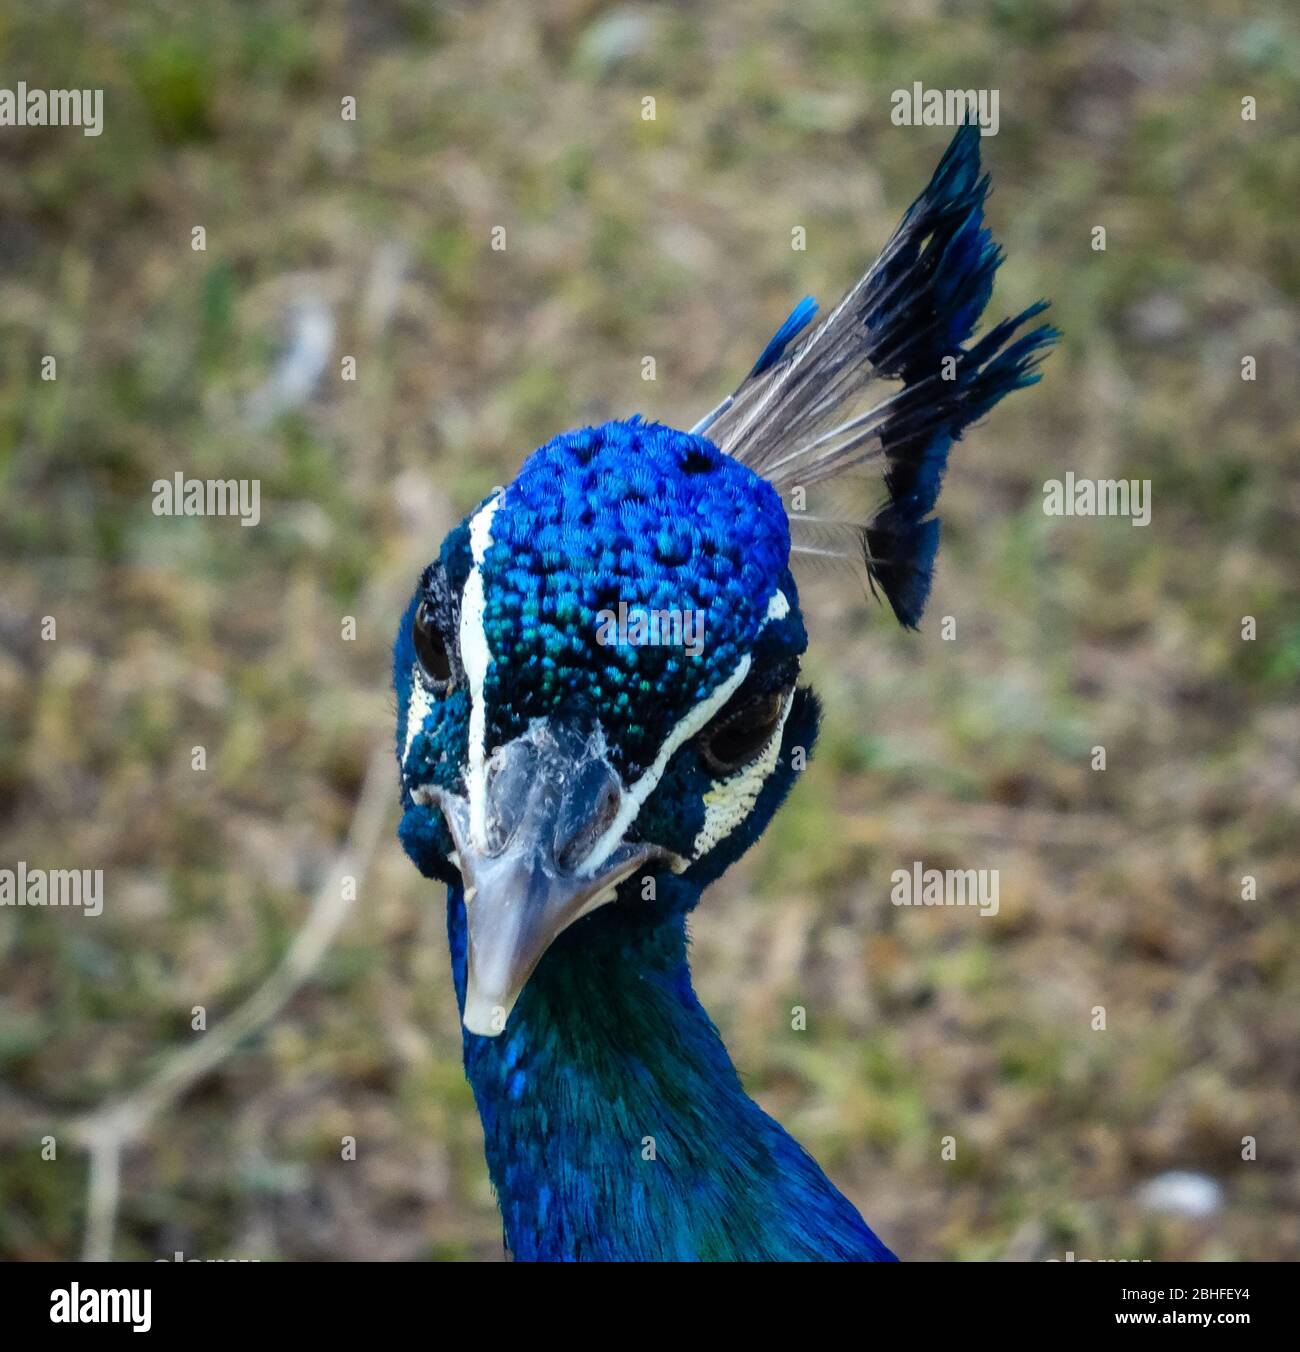 Closeup portrait of beautiful blue male peacock looking directly at camera. Daylight shot of proud bird with grass in background Stock Photo